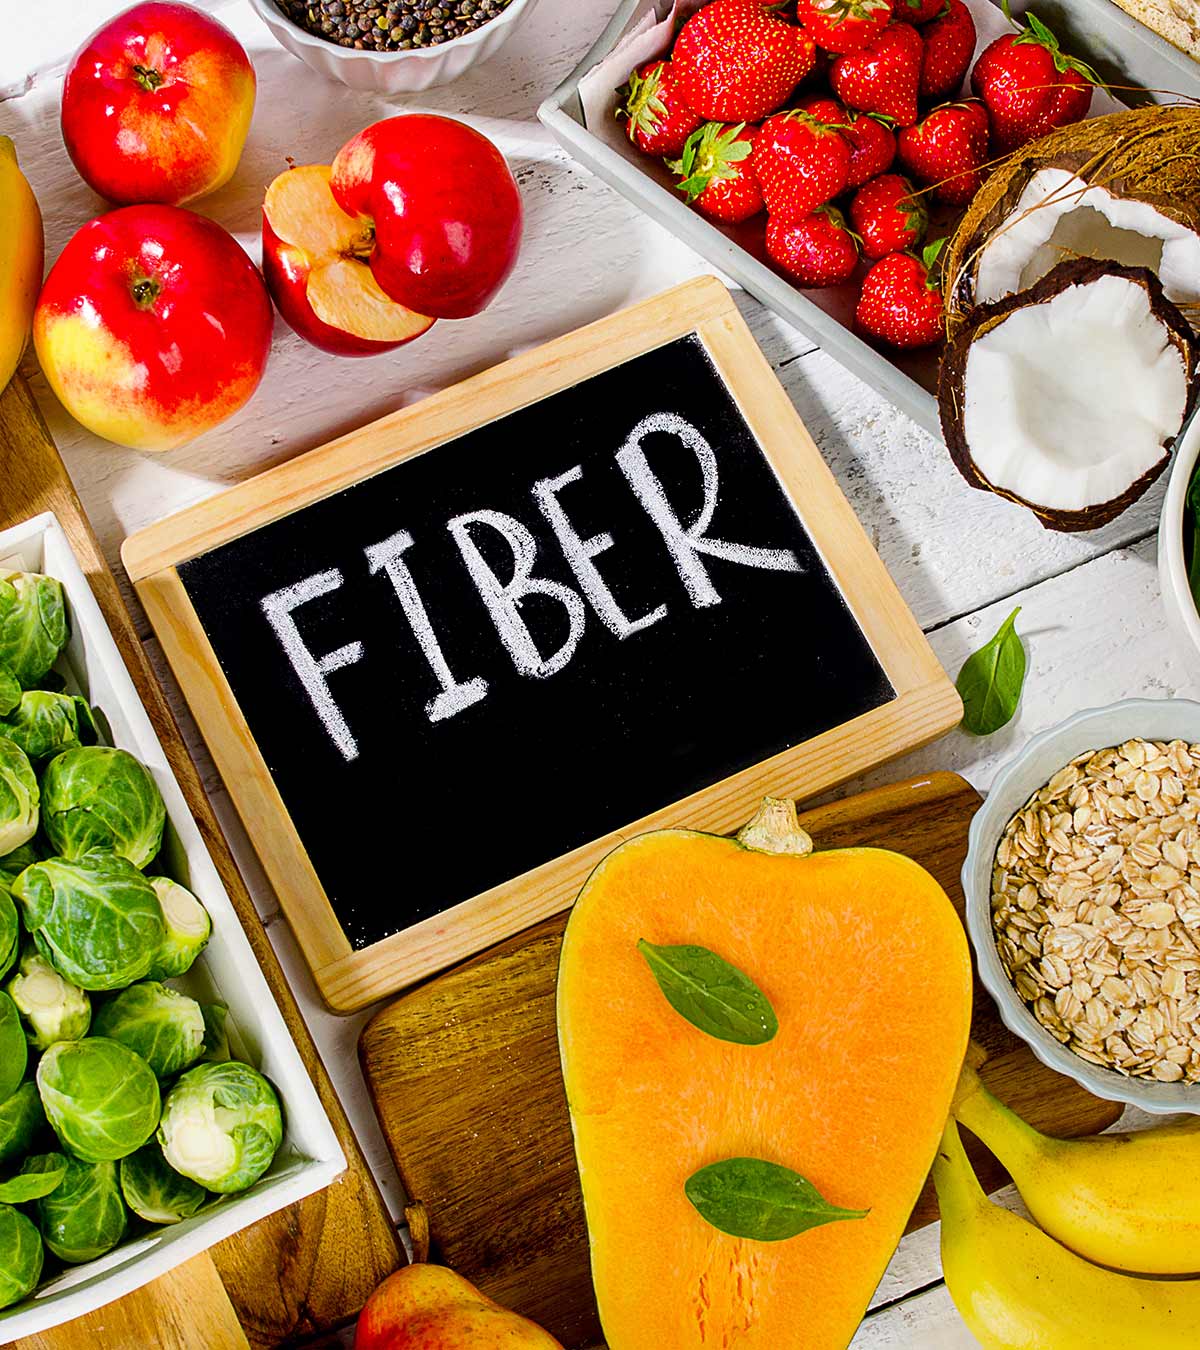 15 High-Fiber Foods To Keep Constipation At Bay In Pregnancy